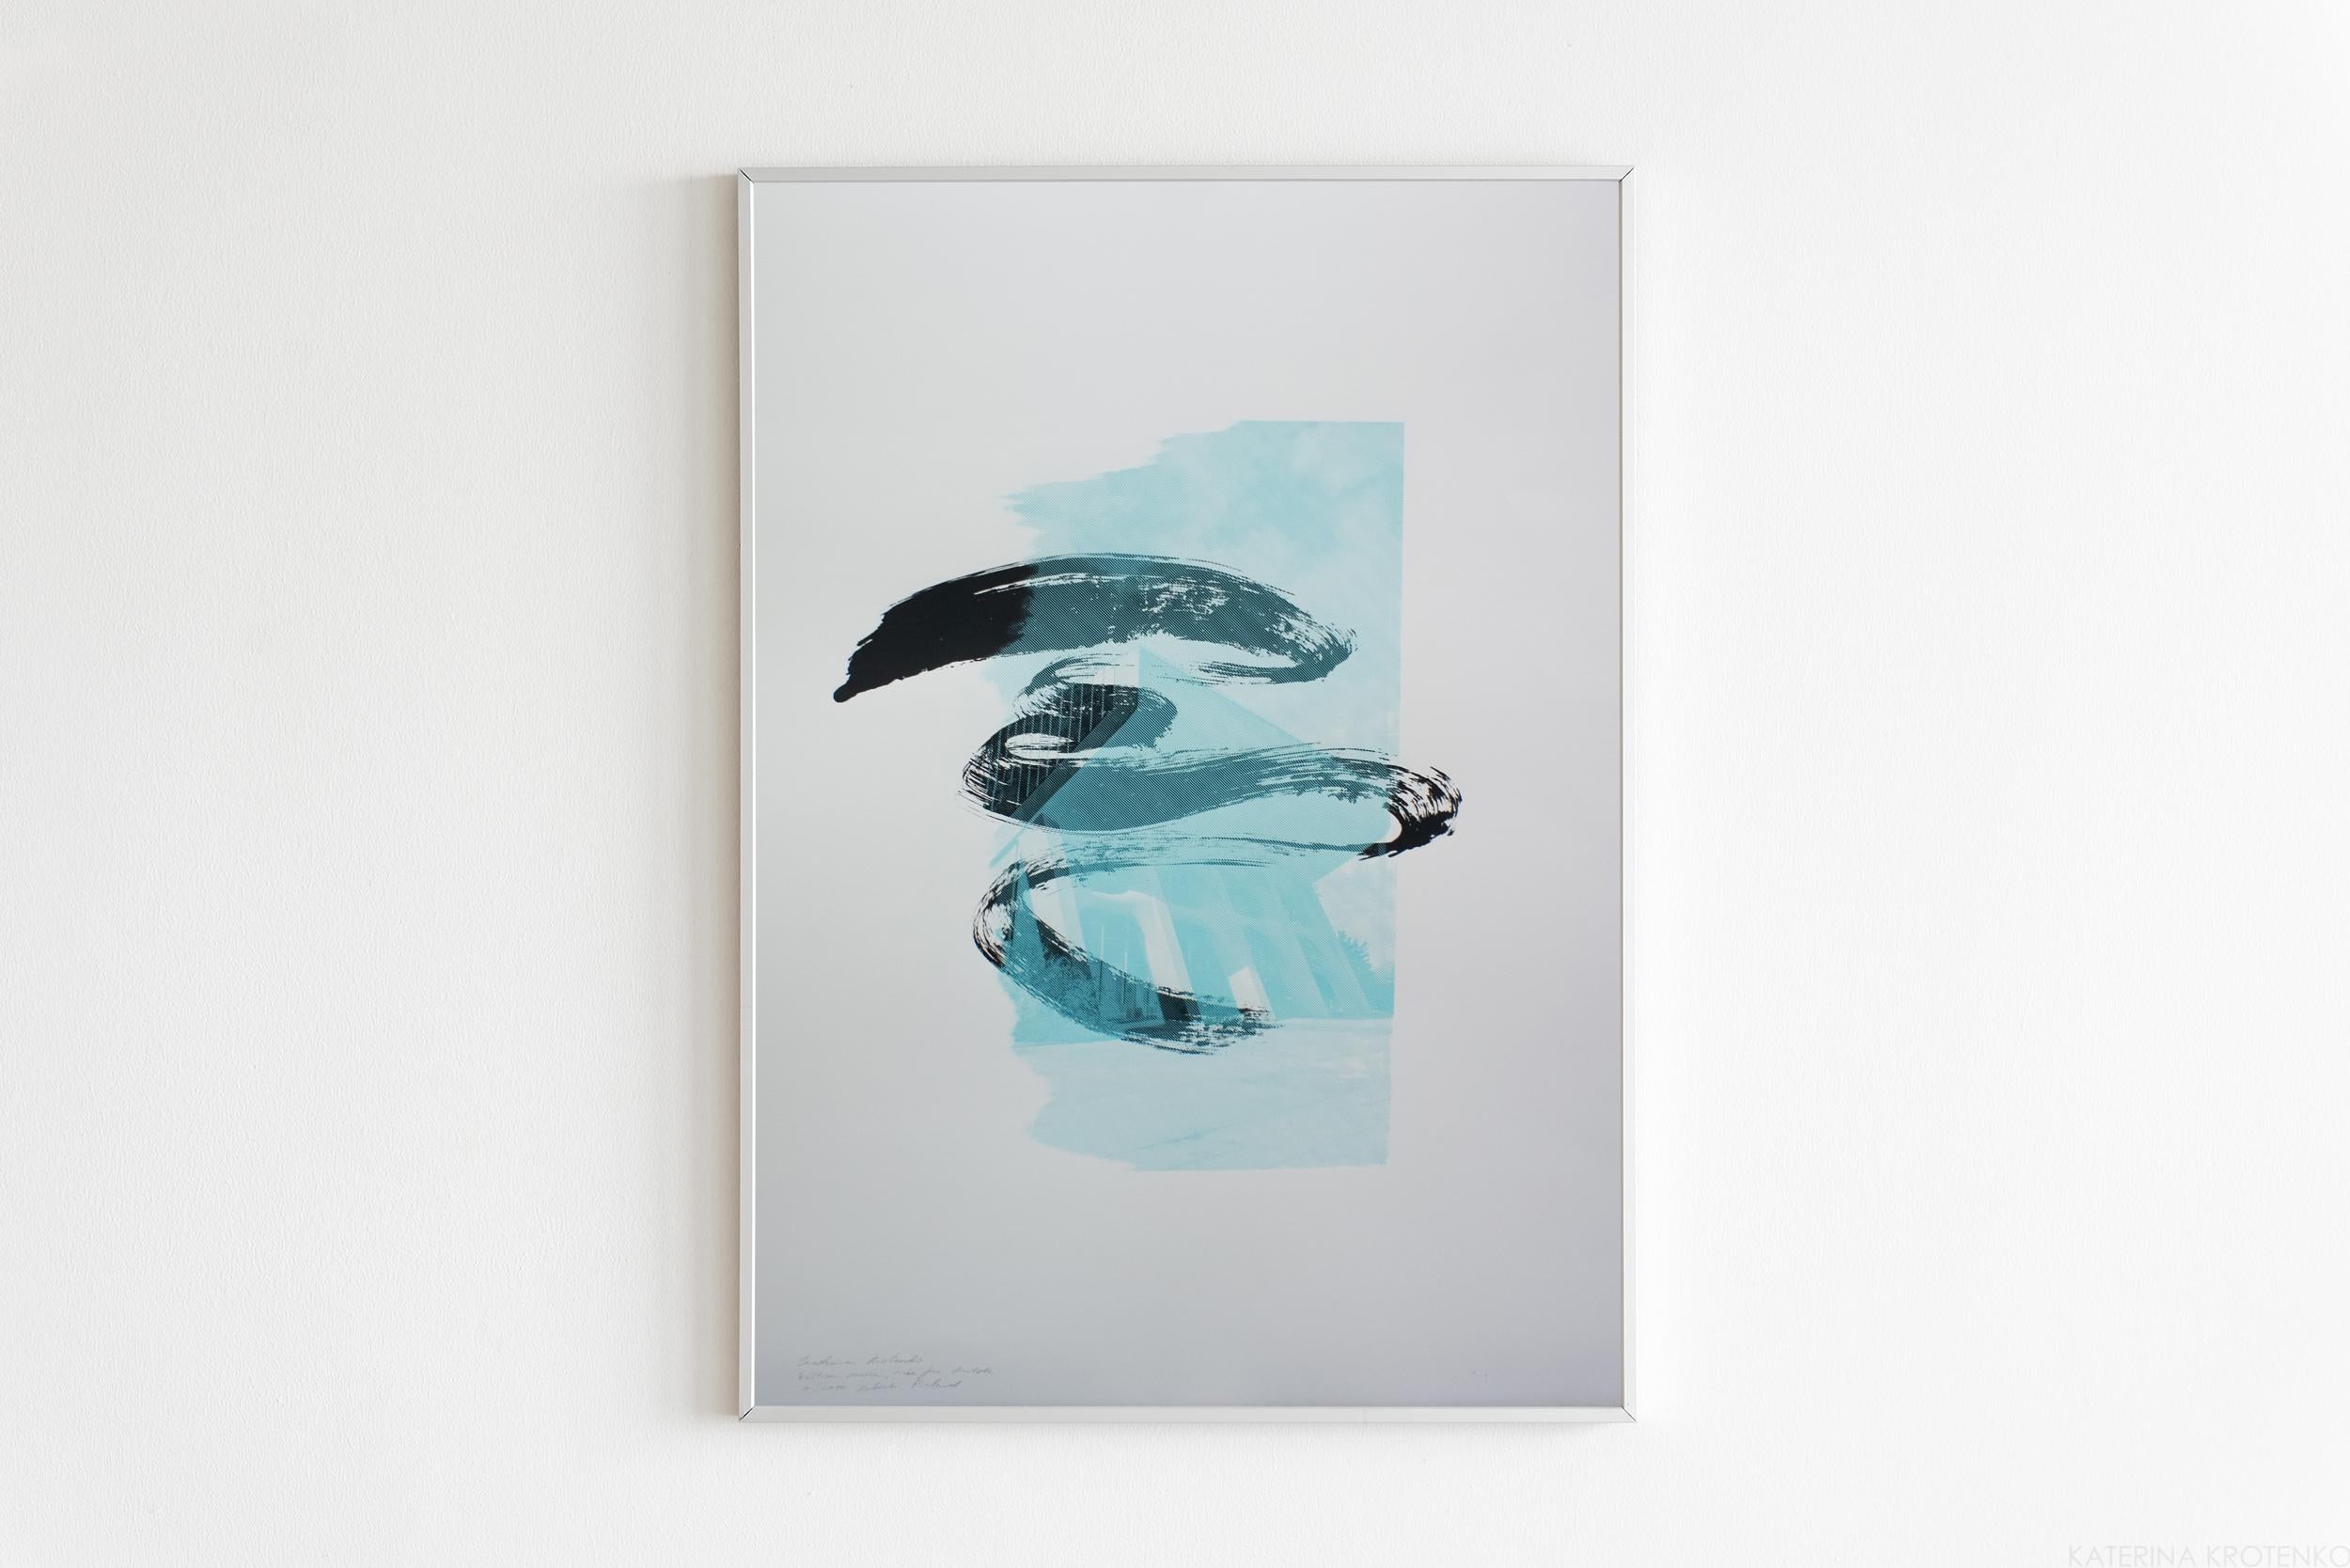 Katerina Krotenko Abstract Print - Invisible treasures # 2 architectural serigraphy, distorted 